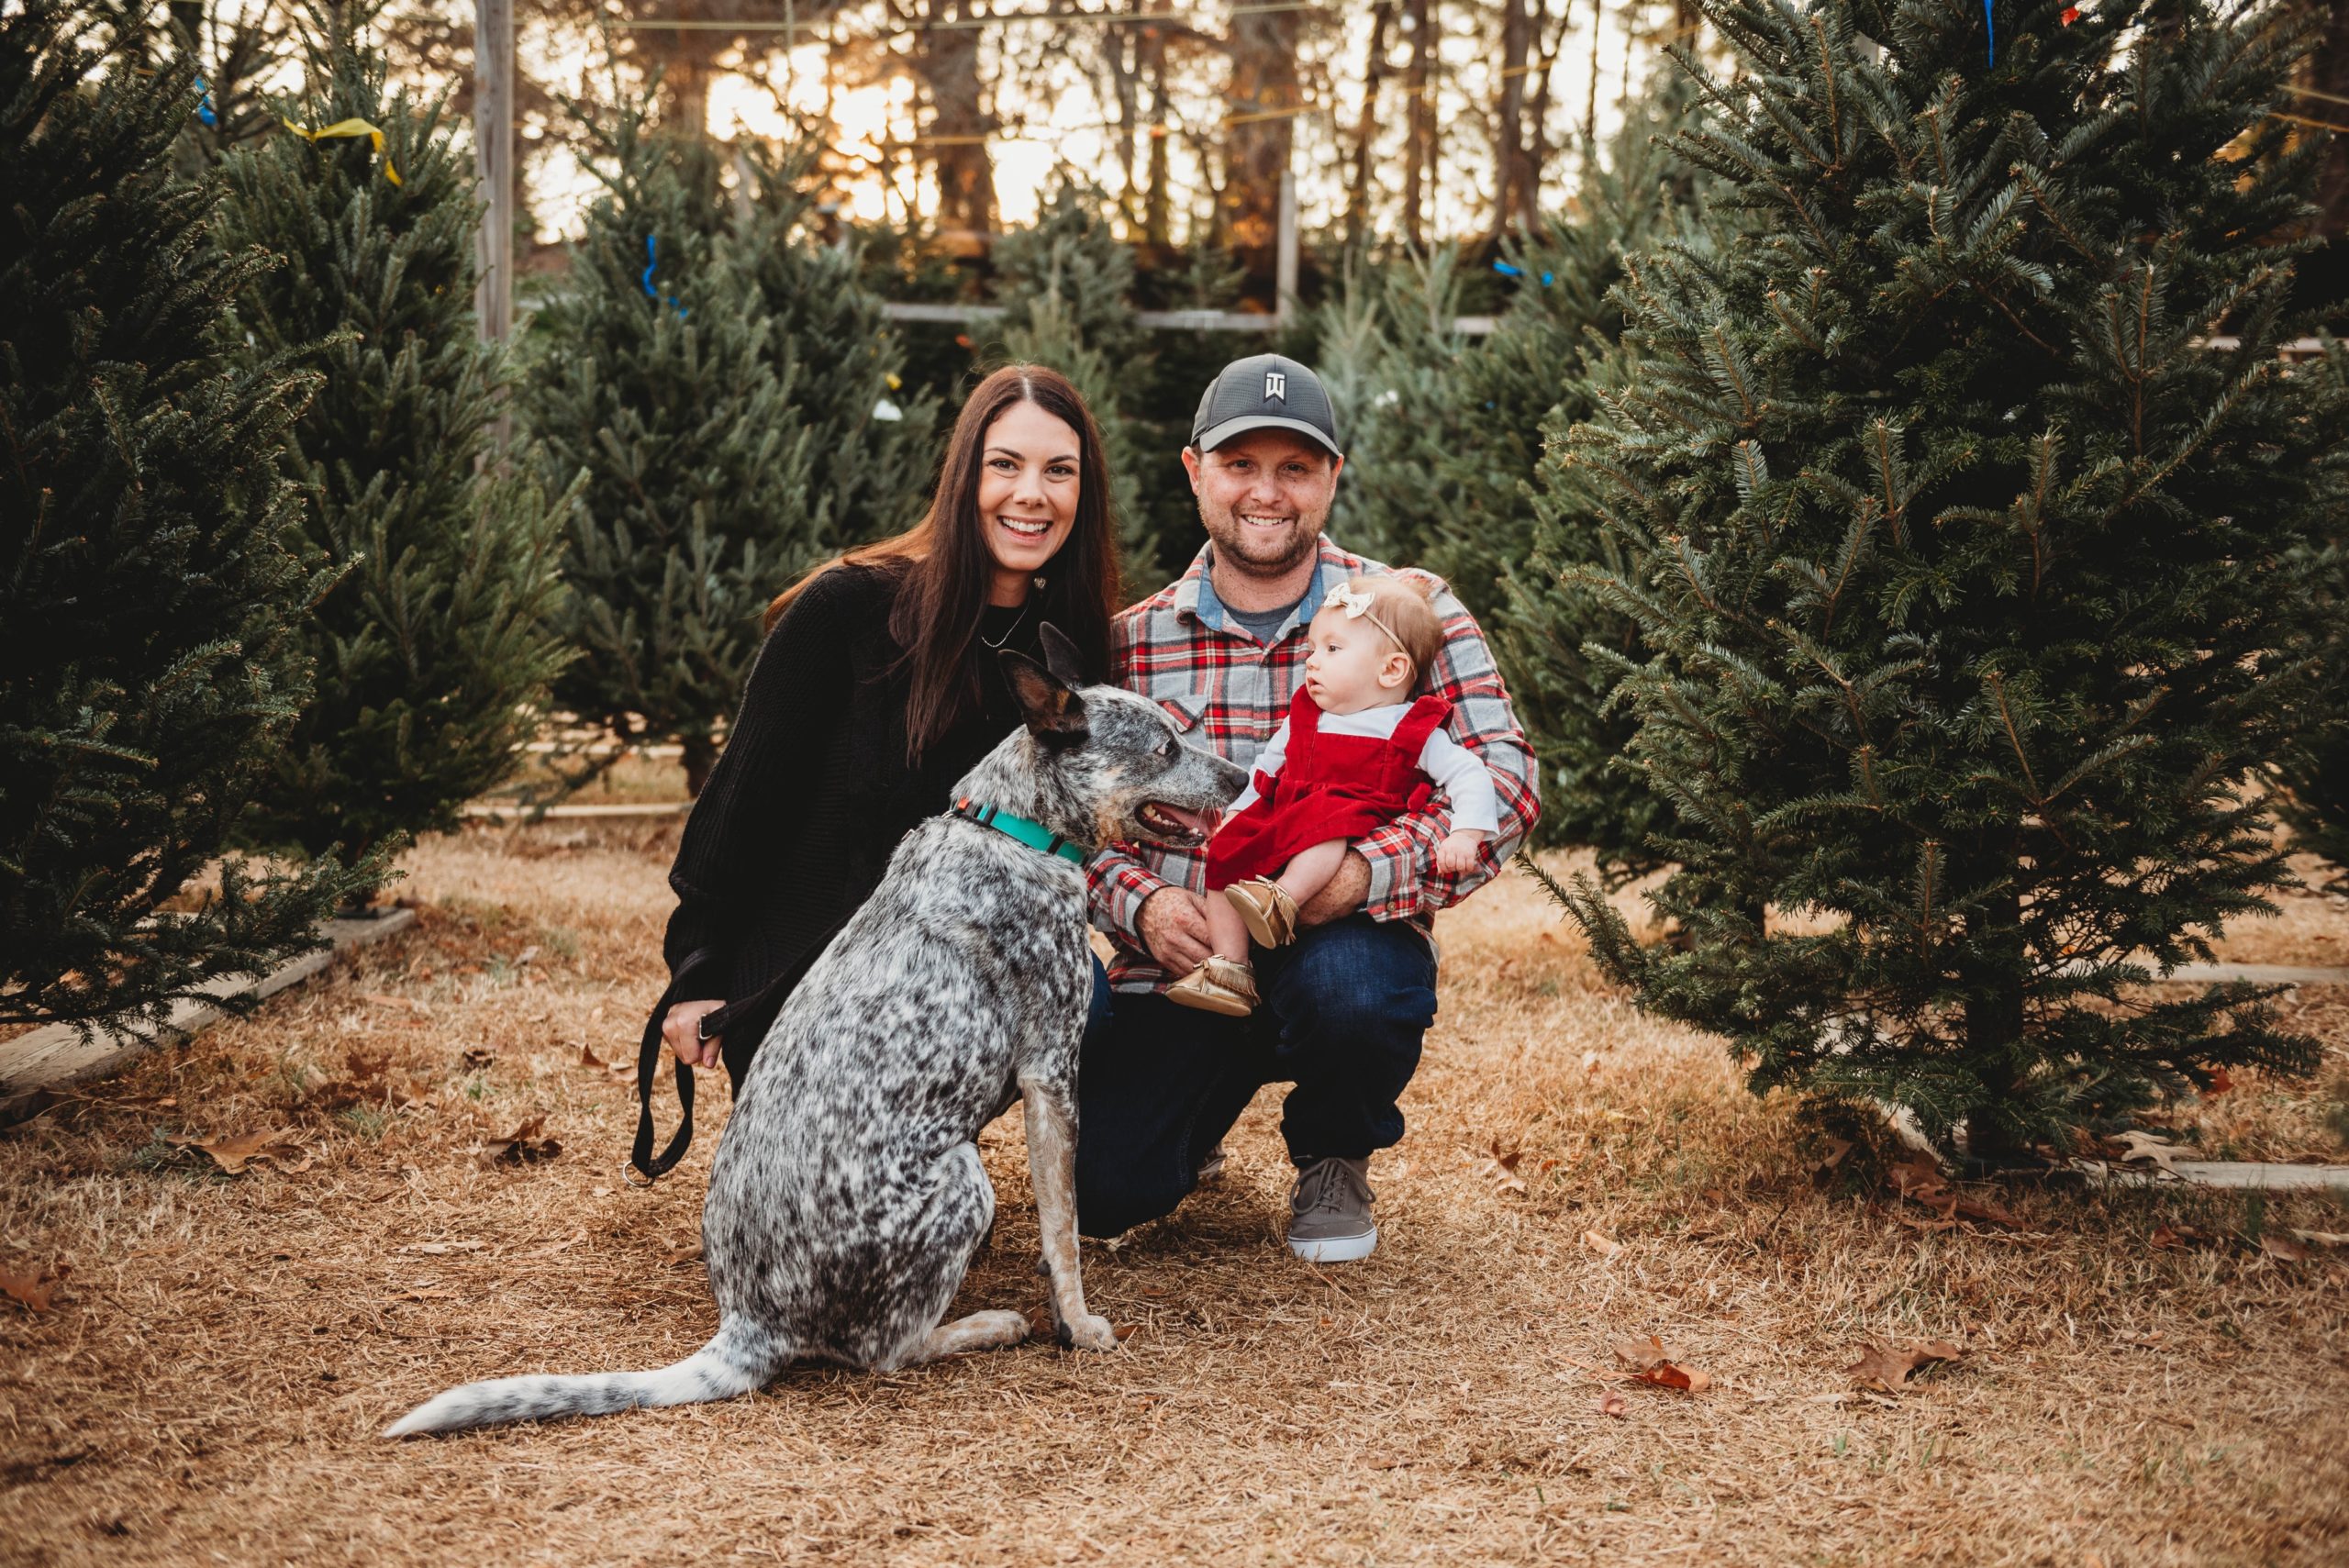 Meet Jessie! She's one of our Raleigh, NC associates. We're excited to share her story with you! Click to read more about her photography journey live on the blog now!